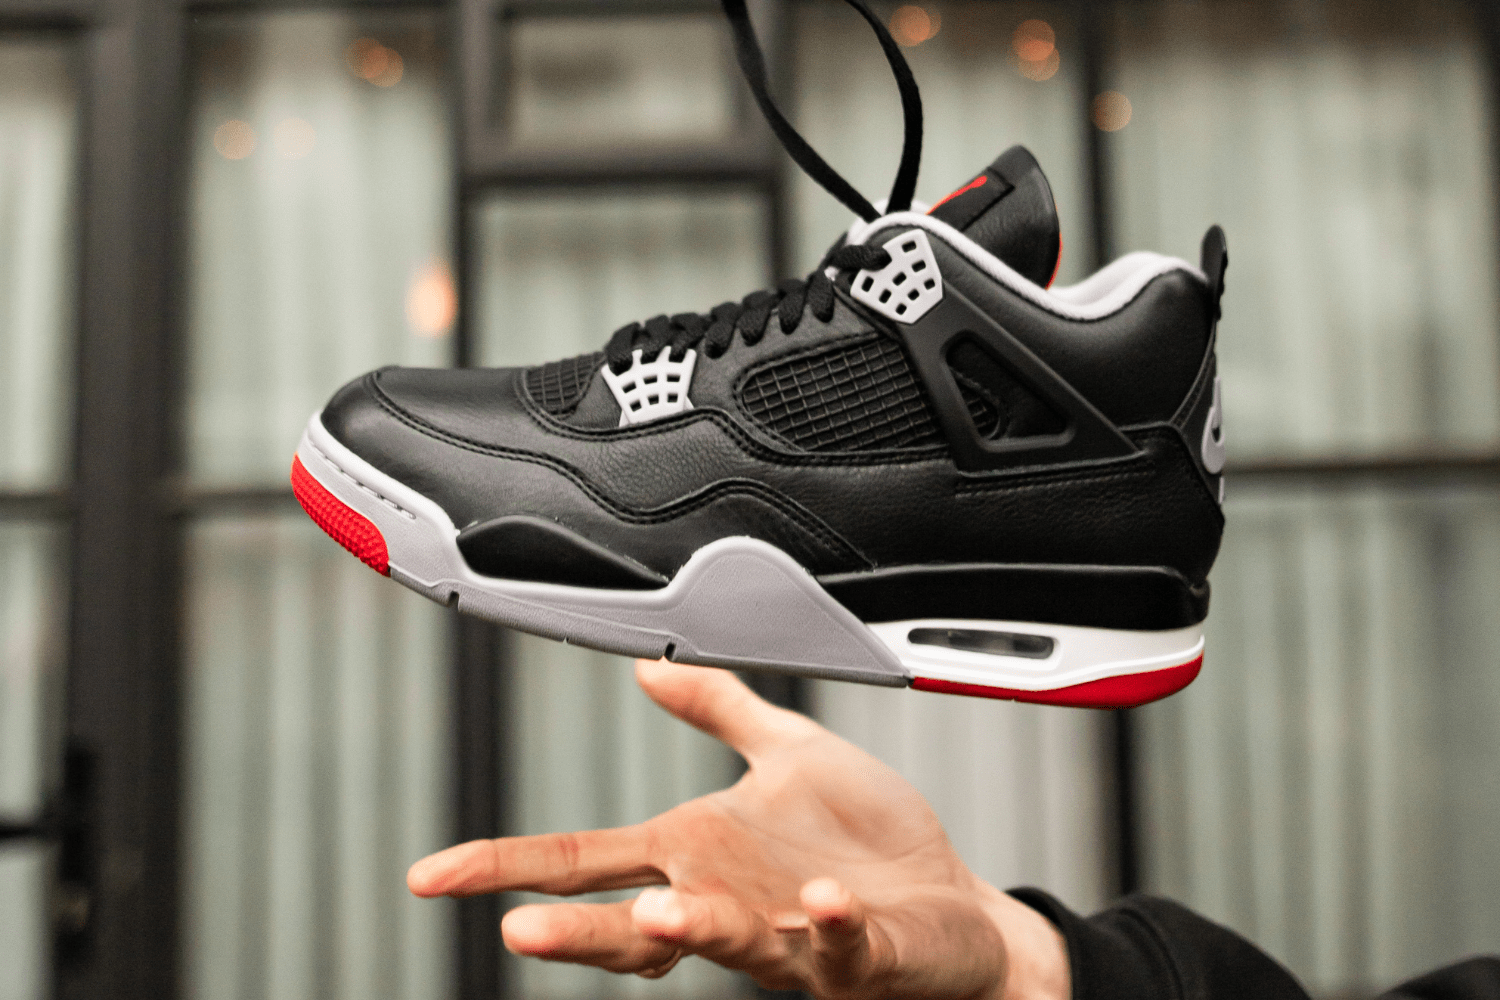 The story behind the Air Jordan 4 'Bred Reimagined'